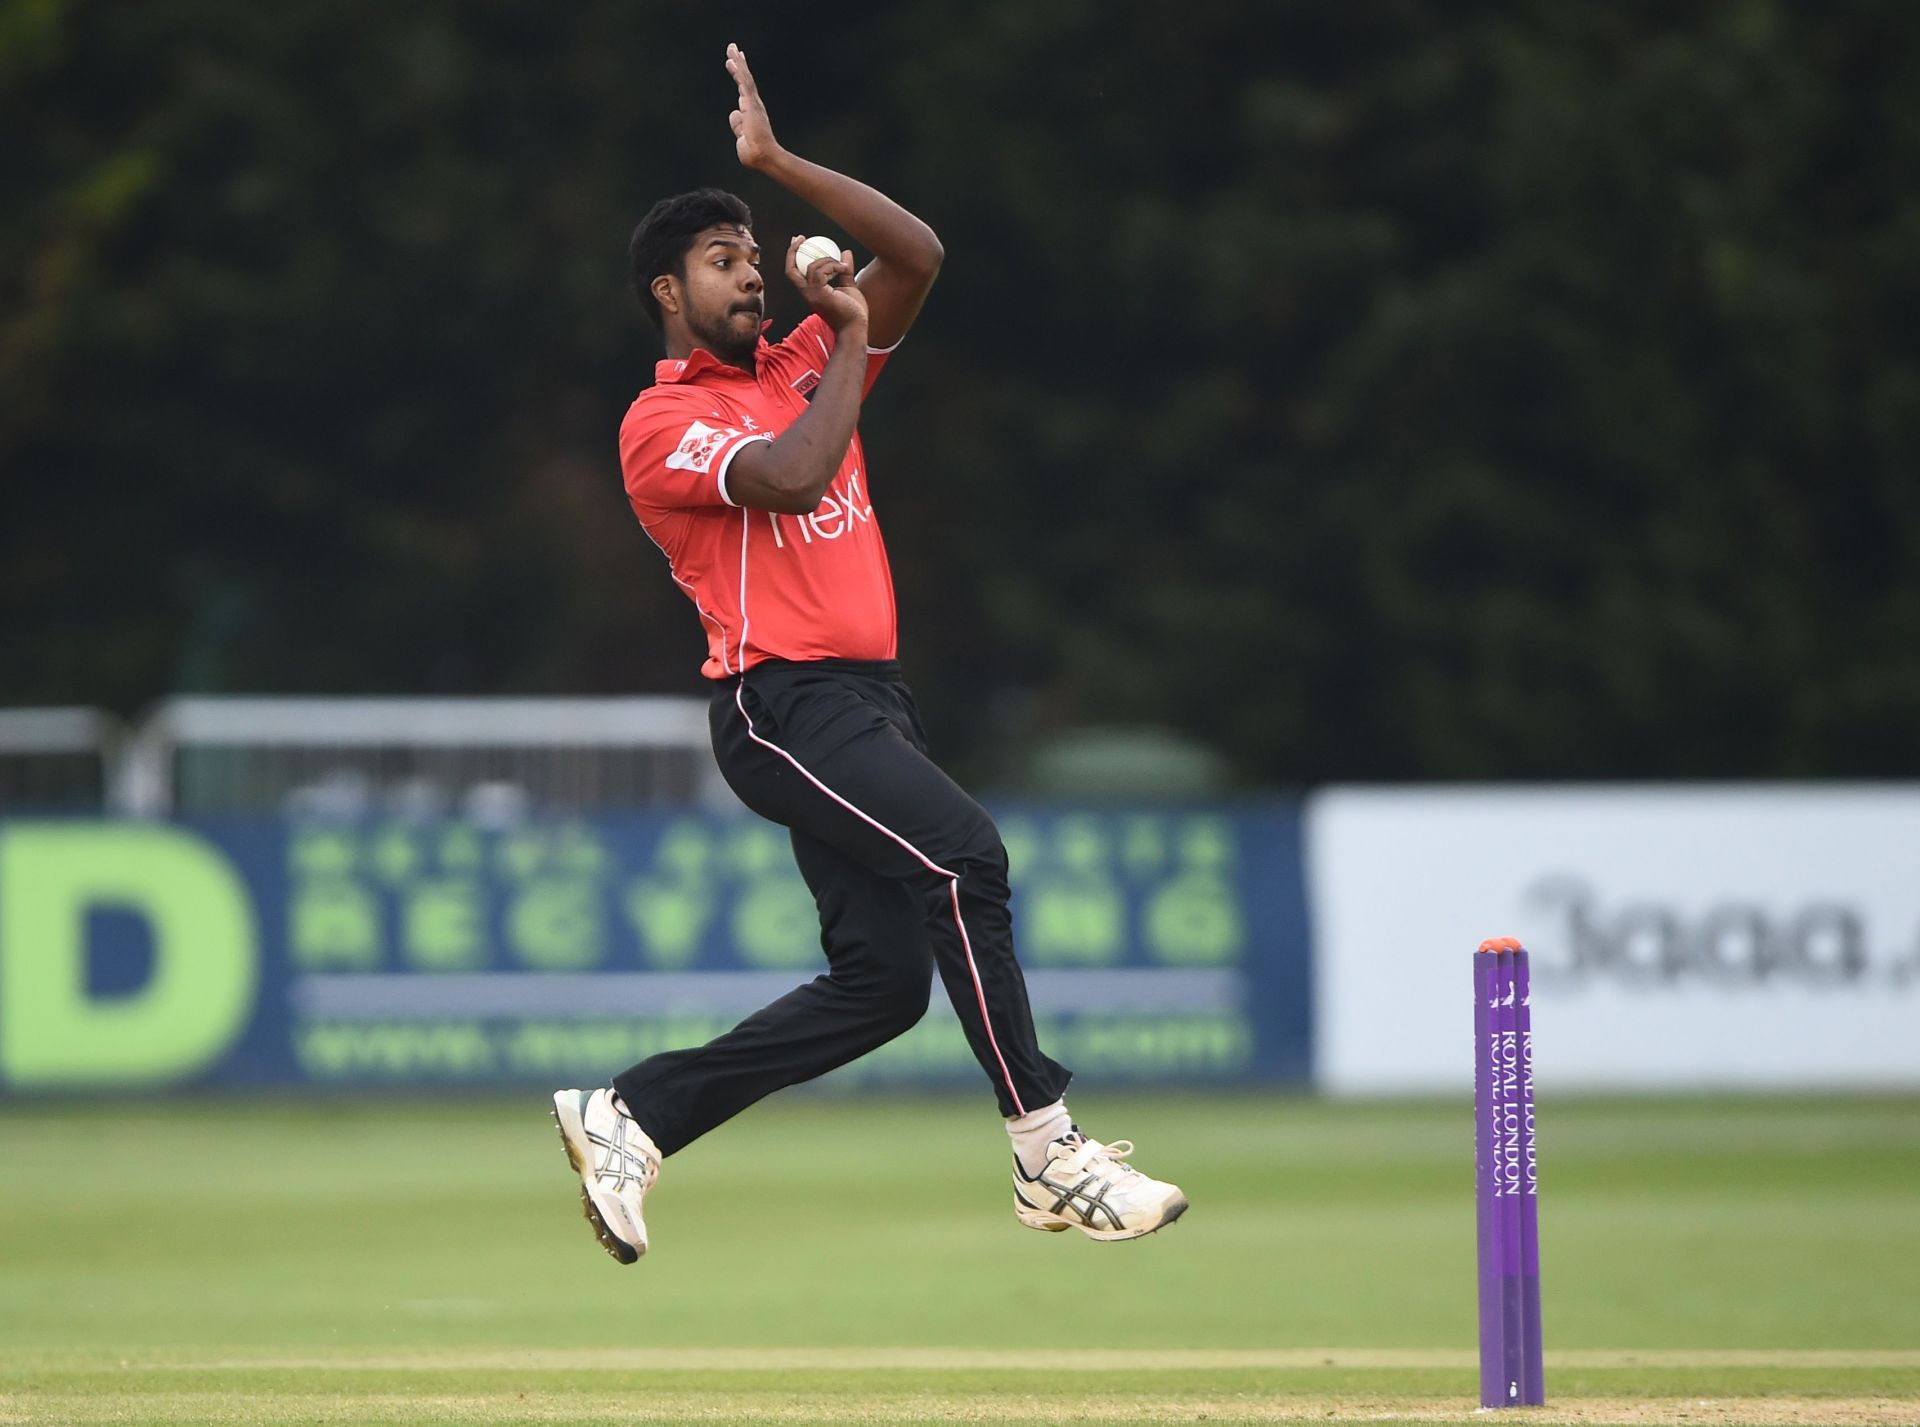 Derbyshire v Leicestershire - Royal London One-Day Cup (Image: Getty)